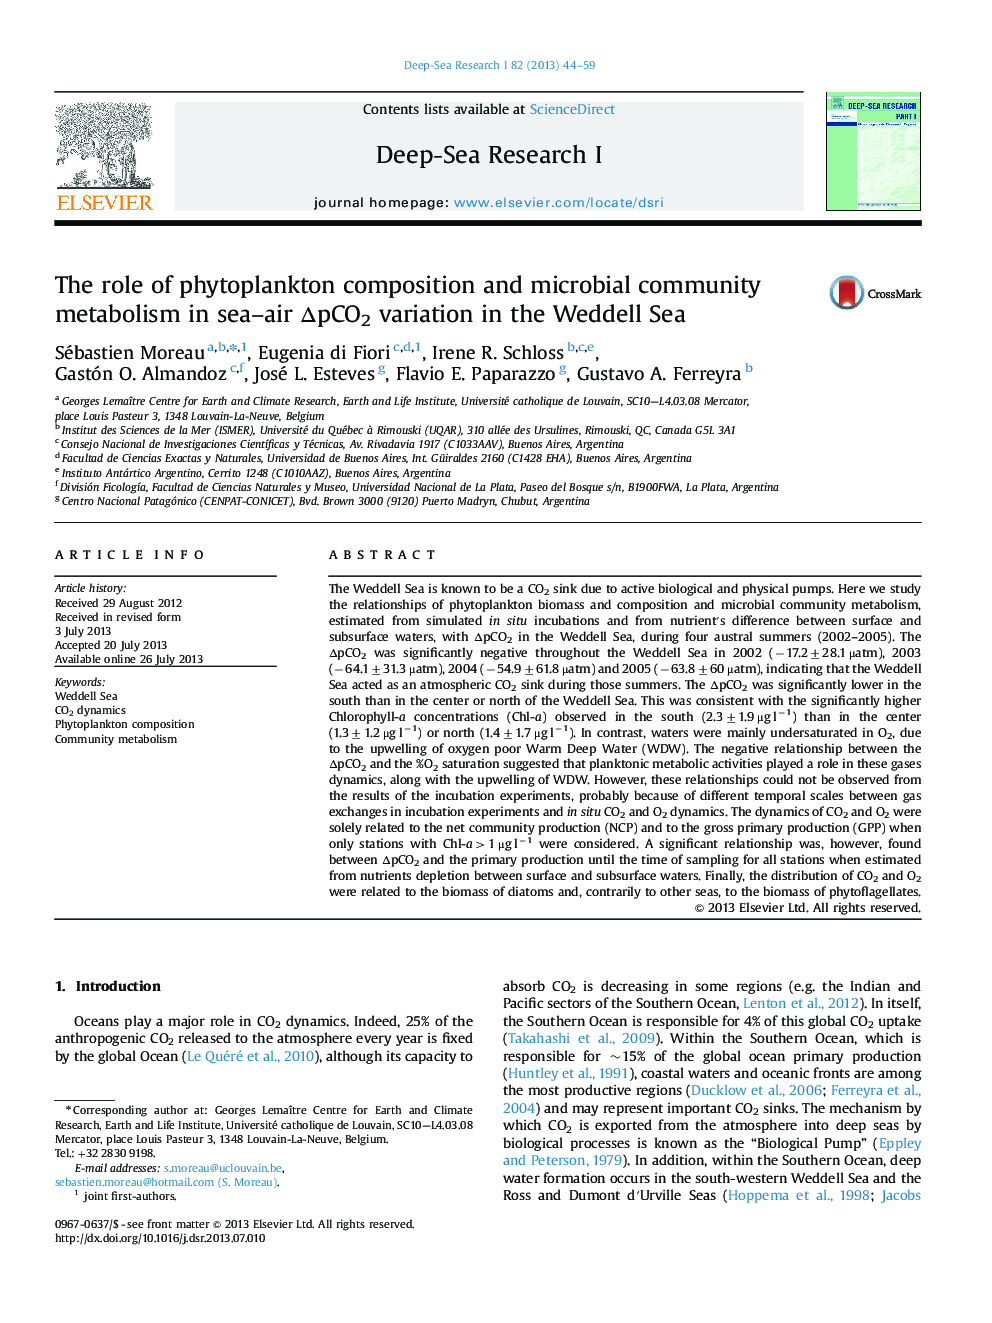 The role of phytoplankton composition and microbial community metabolism in sea–air ΔpCO2 variation in the Weddell Sea